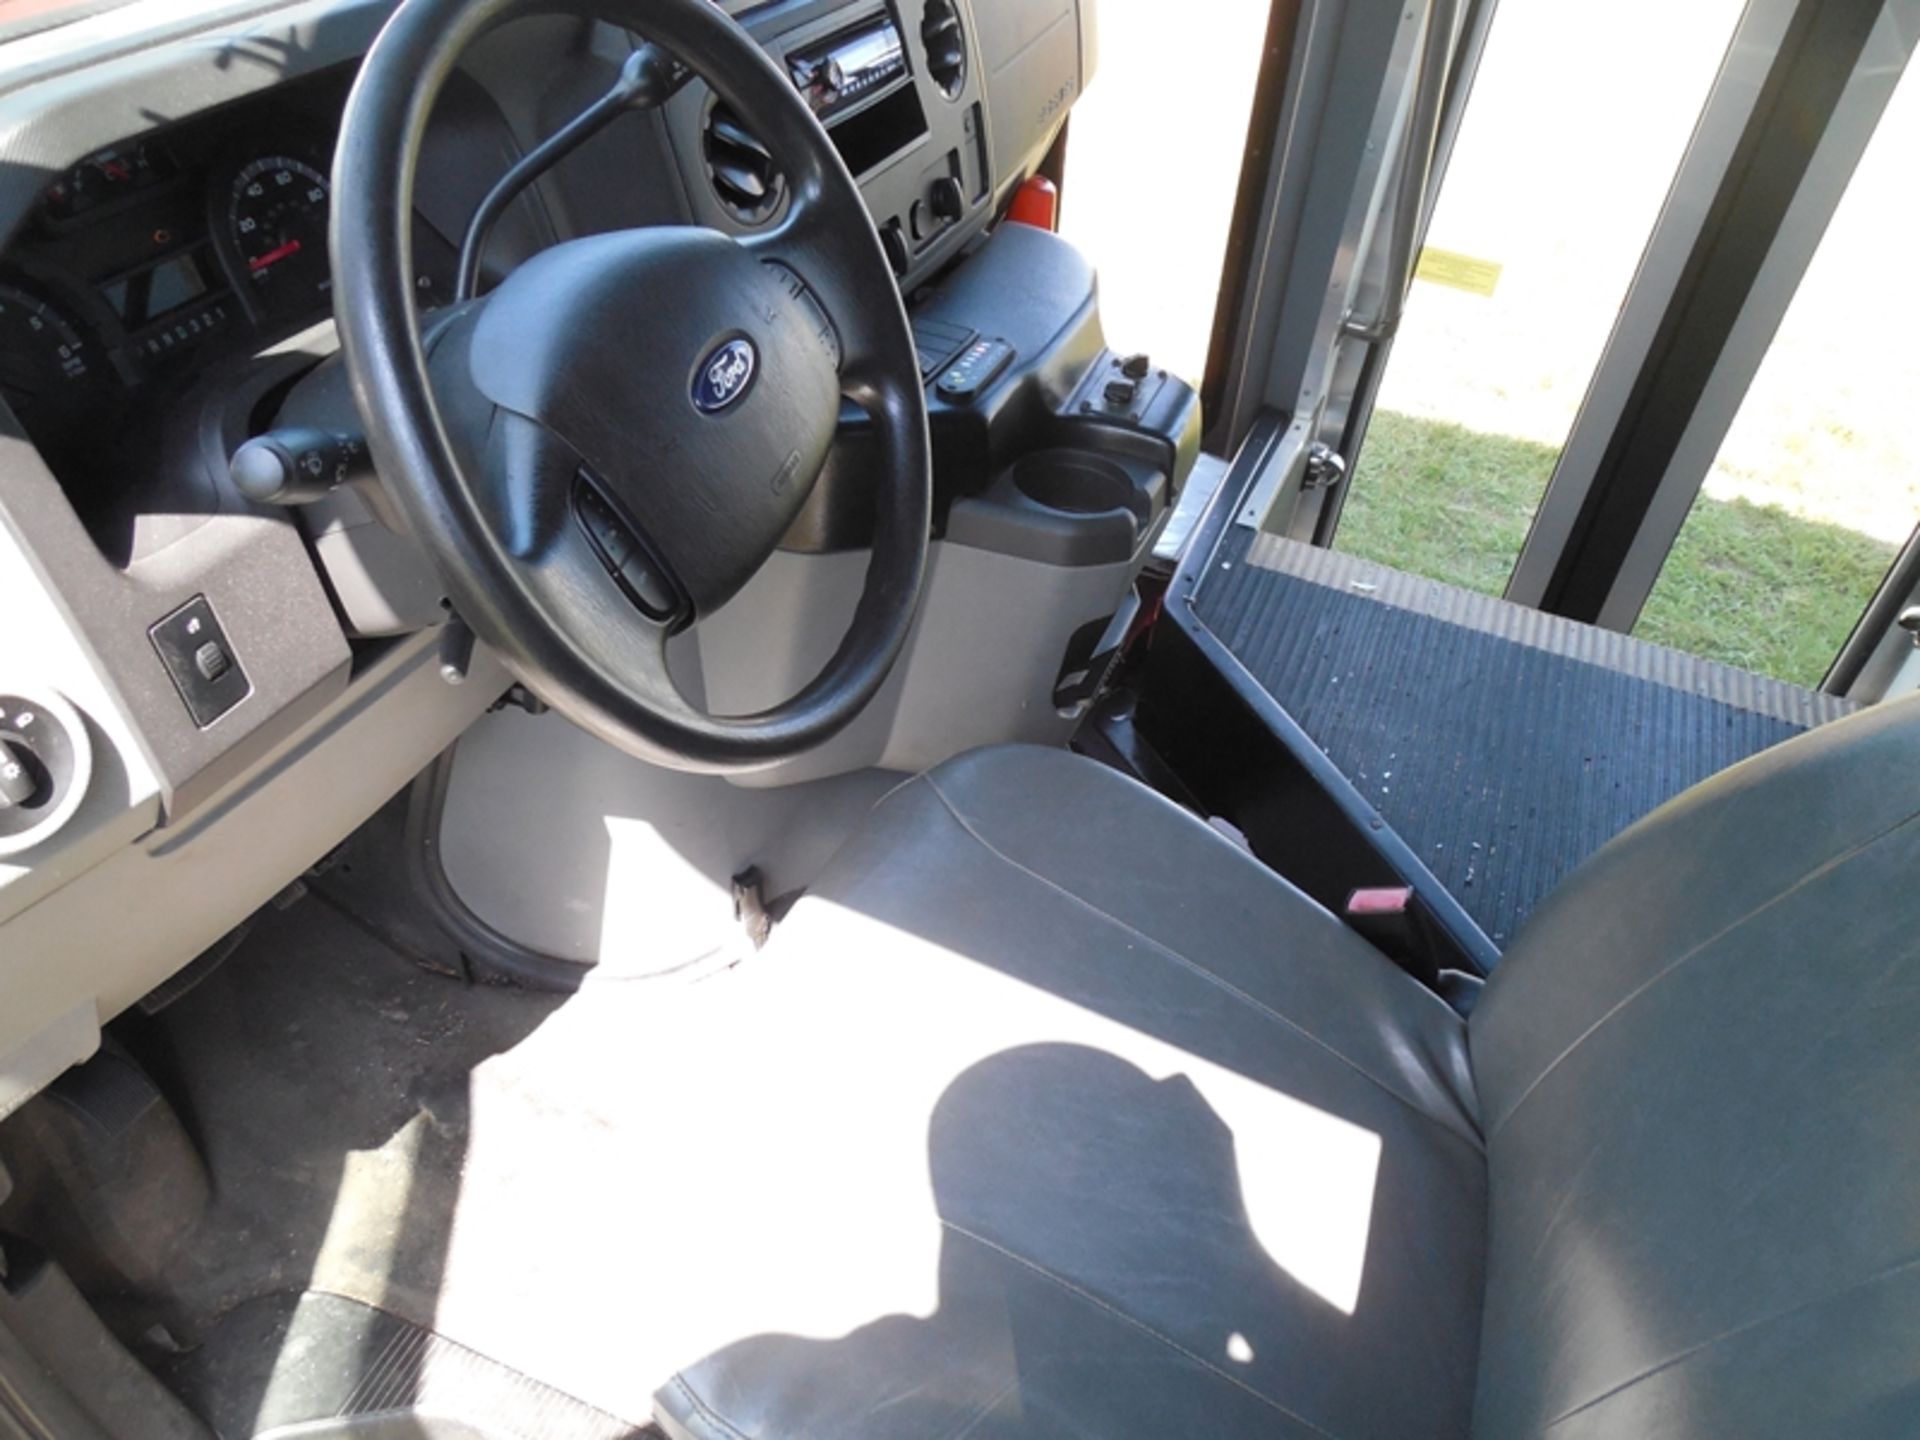 2013 Ford E450 Gas Elkhart Coach Bus vin# 1FDFE4FS4DDB03332 - 108,544 miles missing catalytic - Image 5 of 6